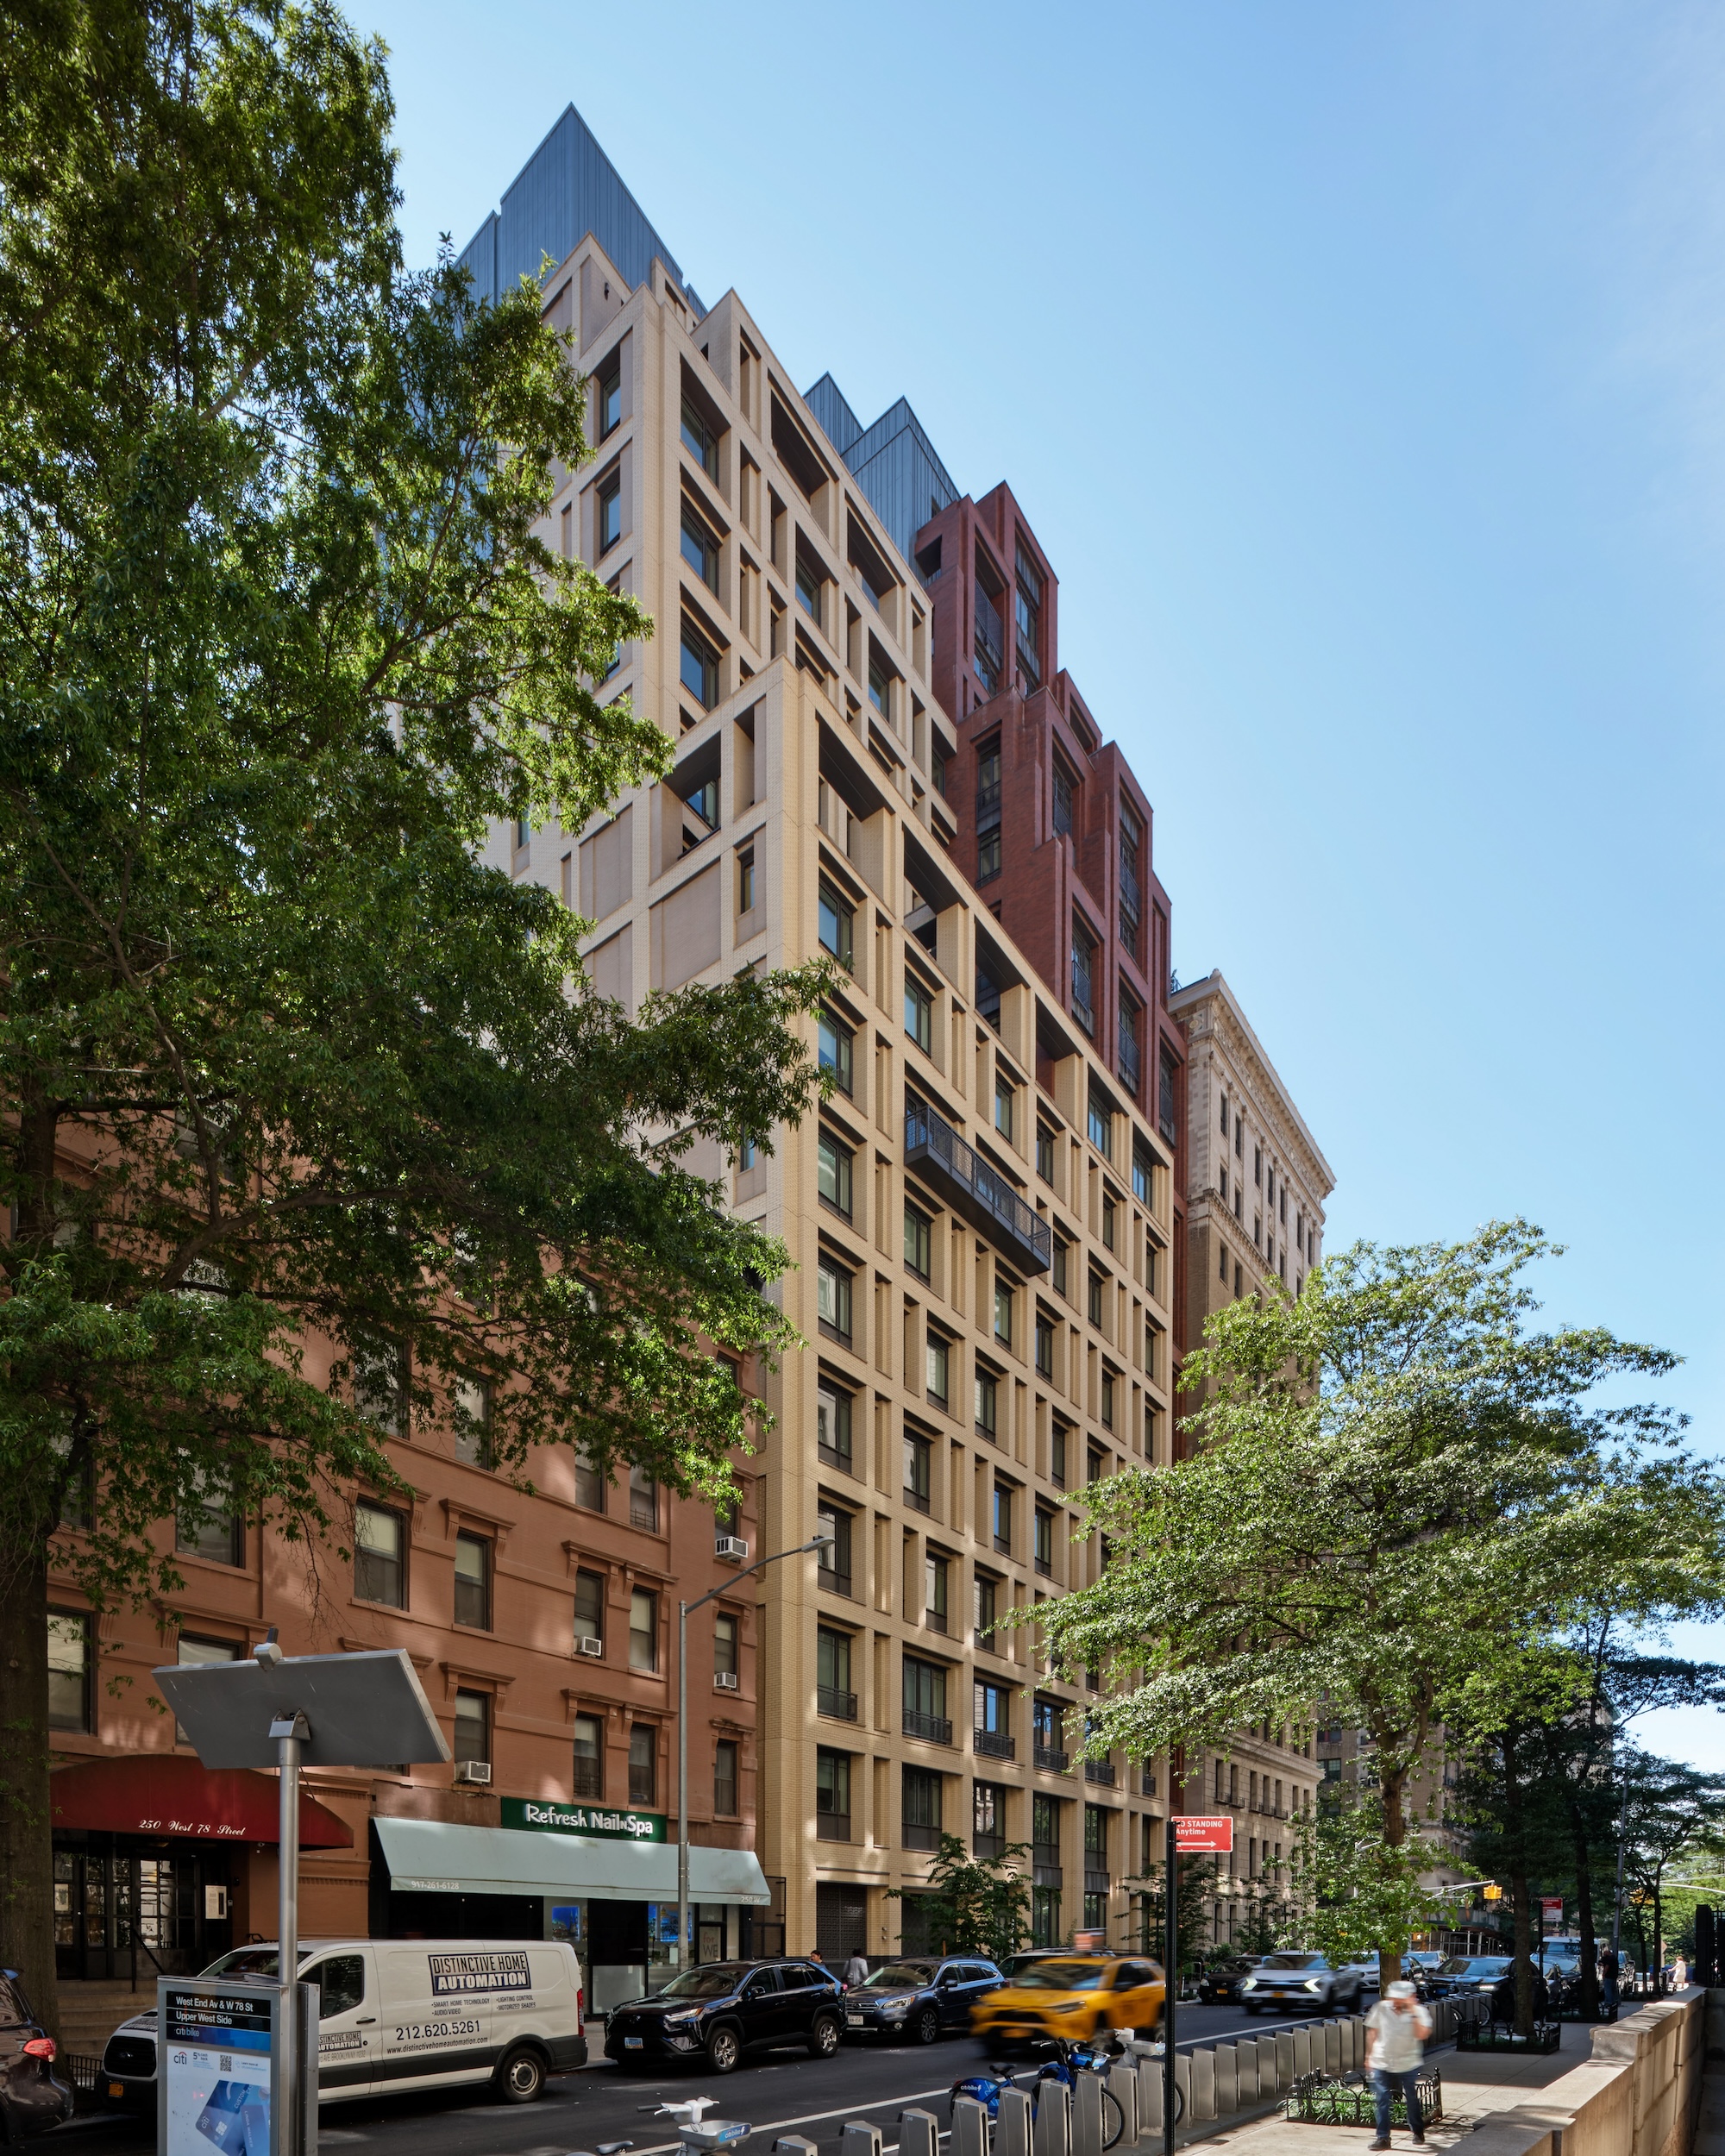 378 West End Avenue residential development, New York City. Photo courtesy COOKFOX Architects